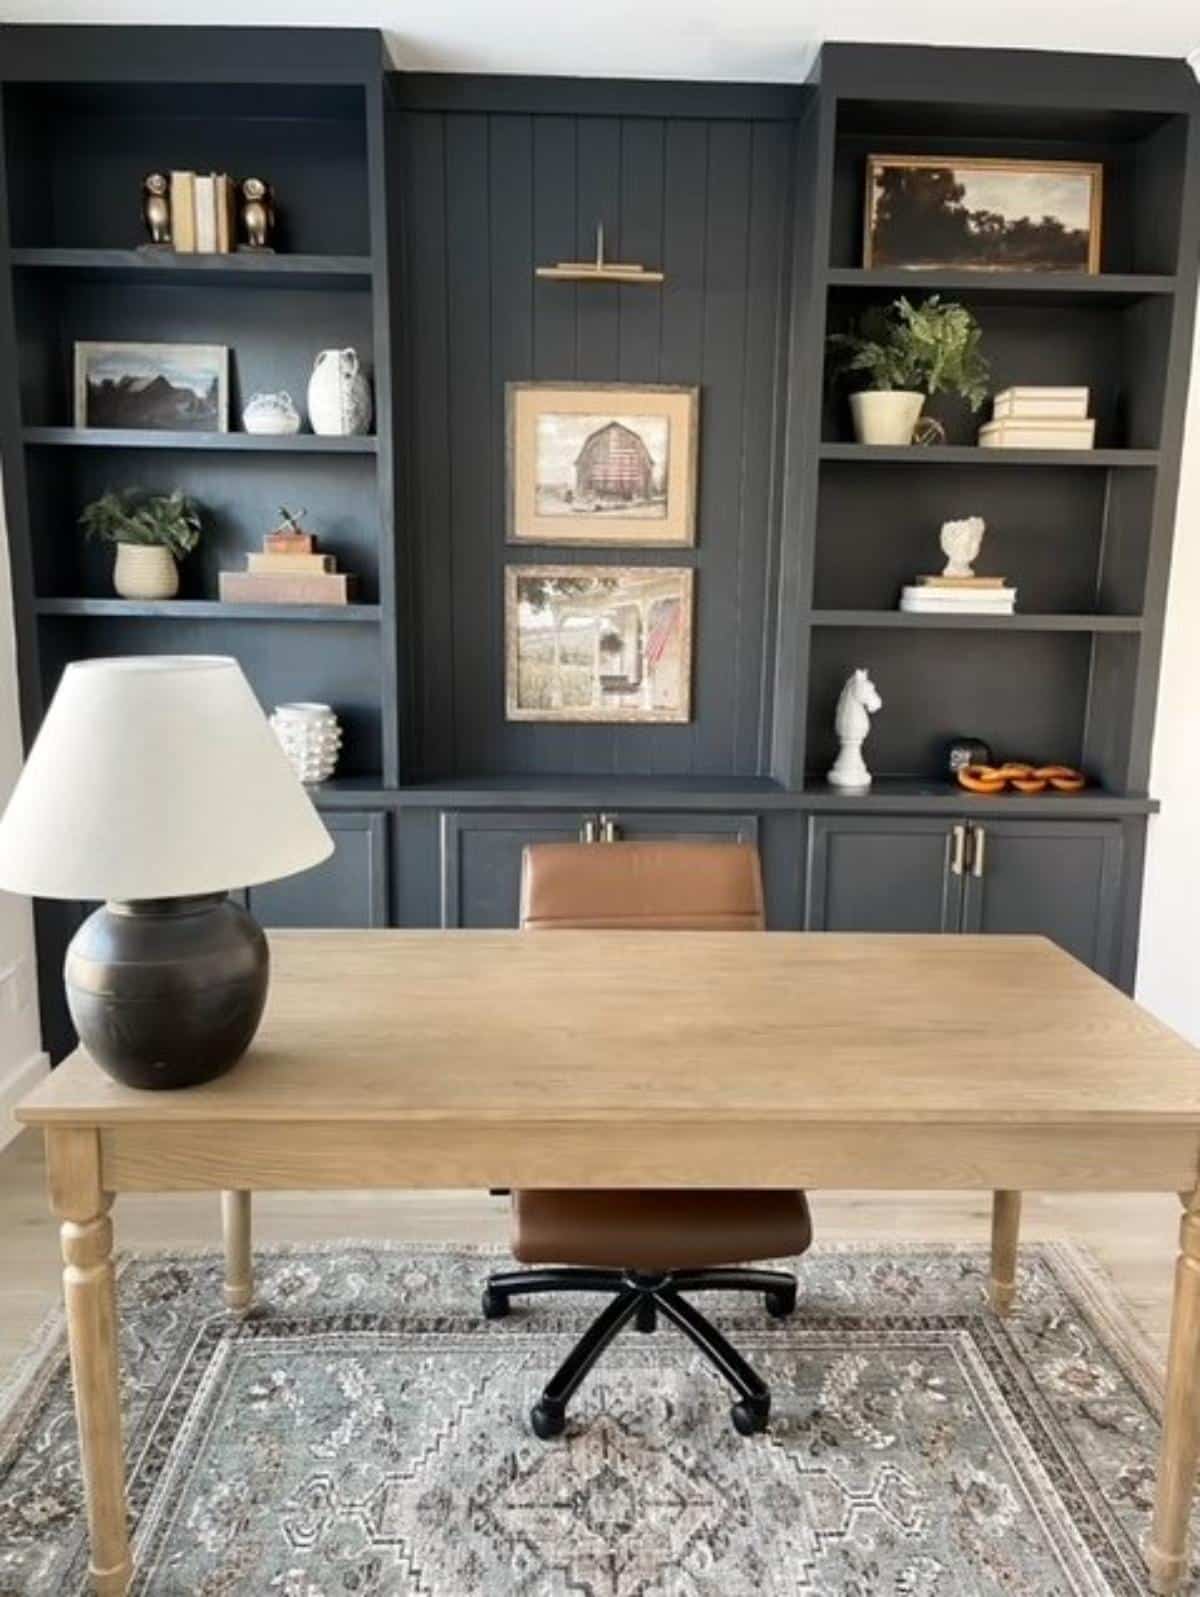 DIY Office Built-In Cabinets